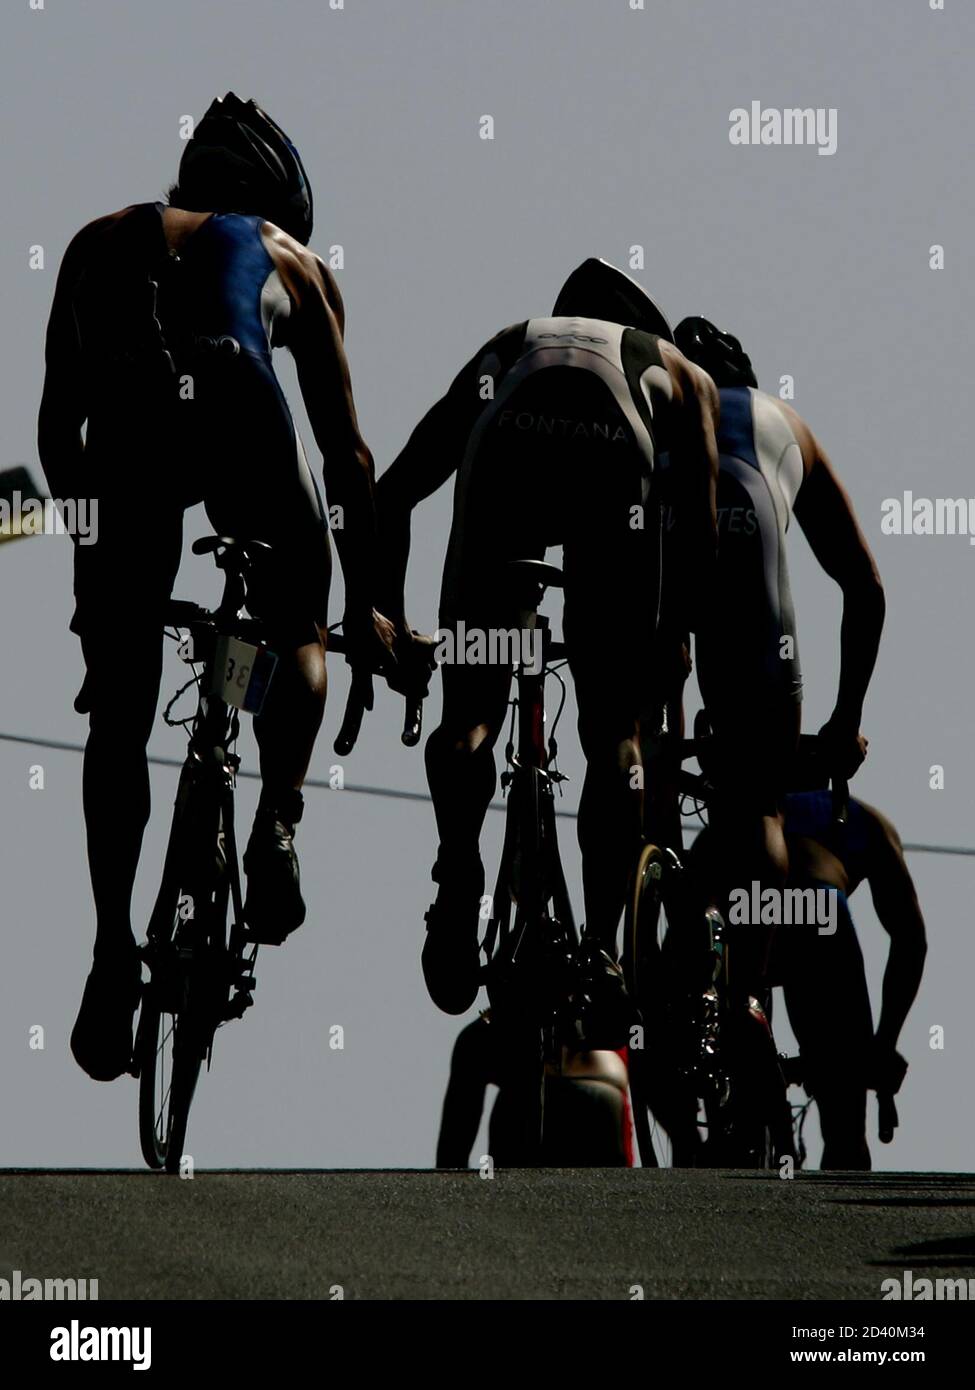 Competitors ride bikes as they climb a hill during the men's triathlon event at the Athens 2004 Olympic Games, August 26, 2004. REUTERS/Kim Kyung-Hoon  KKH Stock Photo